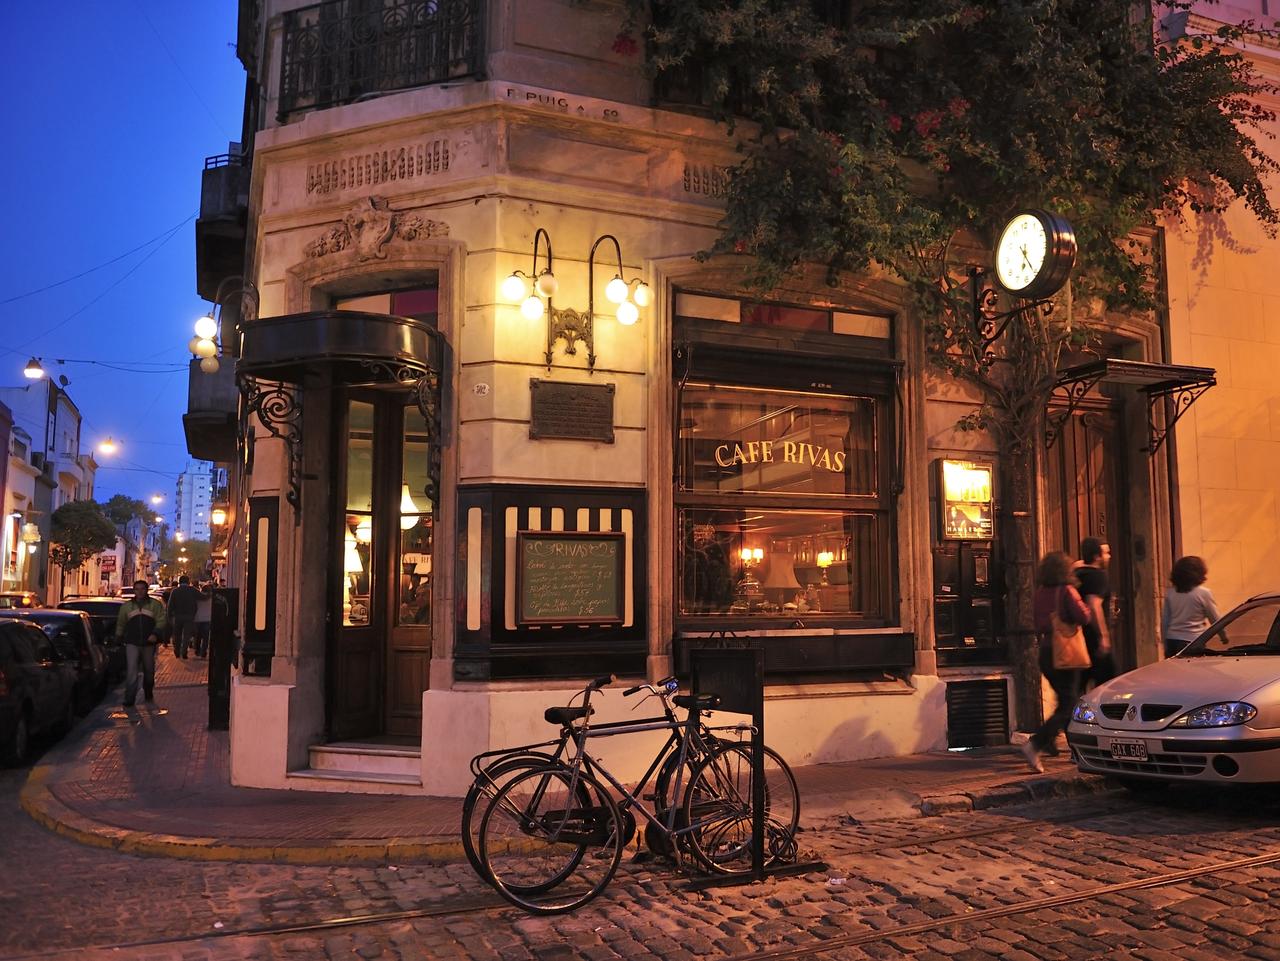 Night view of old Cafe, San Telmo, Buenos Aires, Argentina,